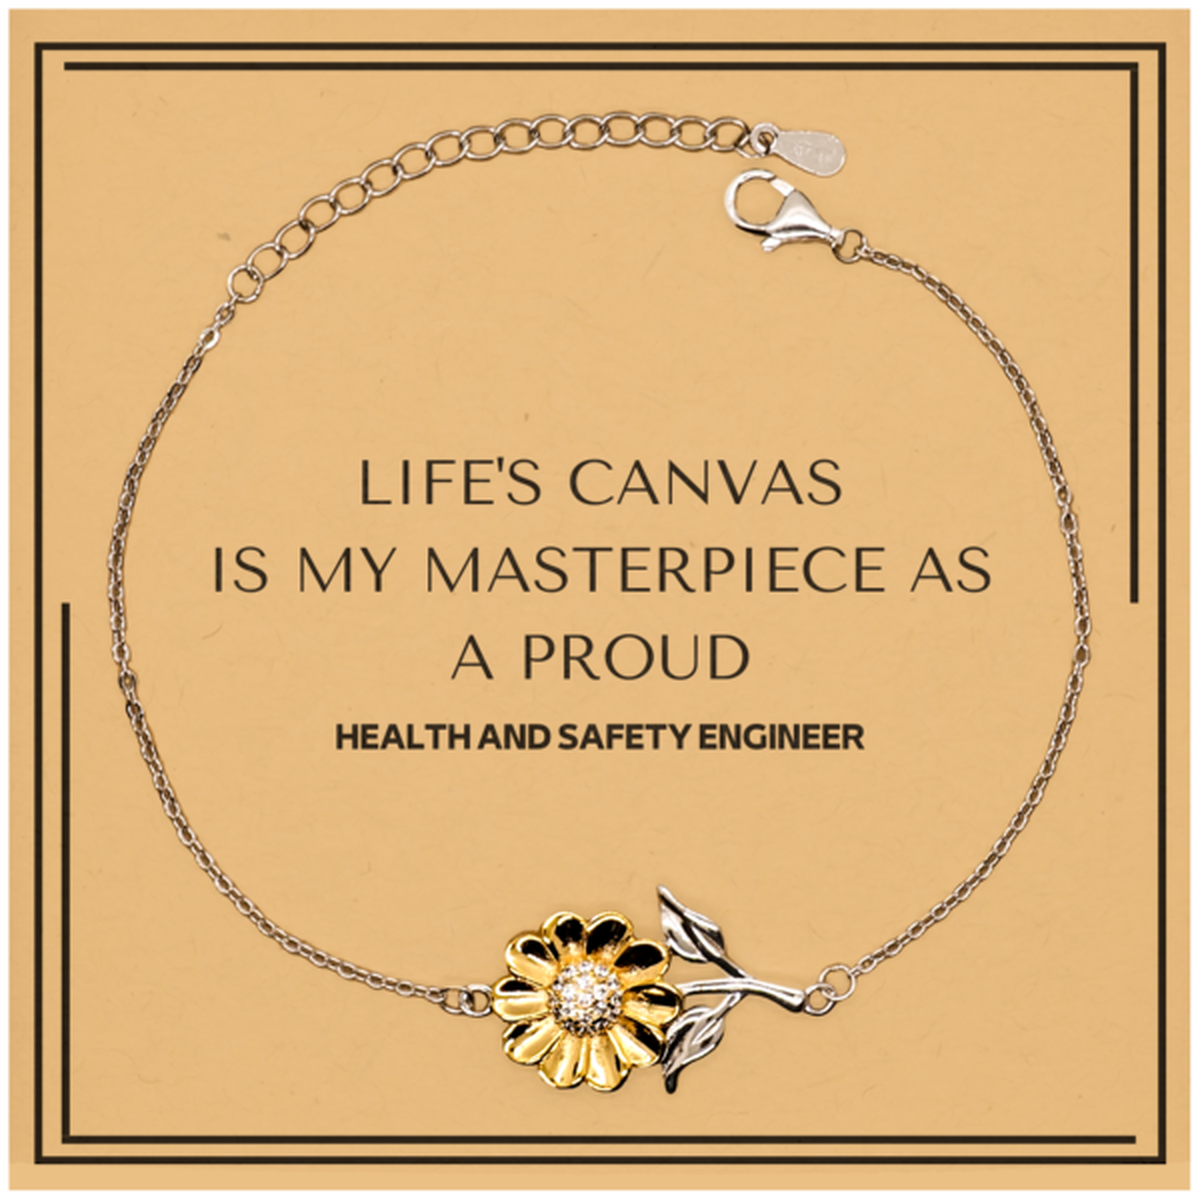 Proud Health and Safety Engineer Gifts, Life's canvas is my masterpiece, Epic Birthday Christmas Unique Sunflower Bracelet For Health and Safety Engineer, Coworkers, Men, Women, Friends